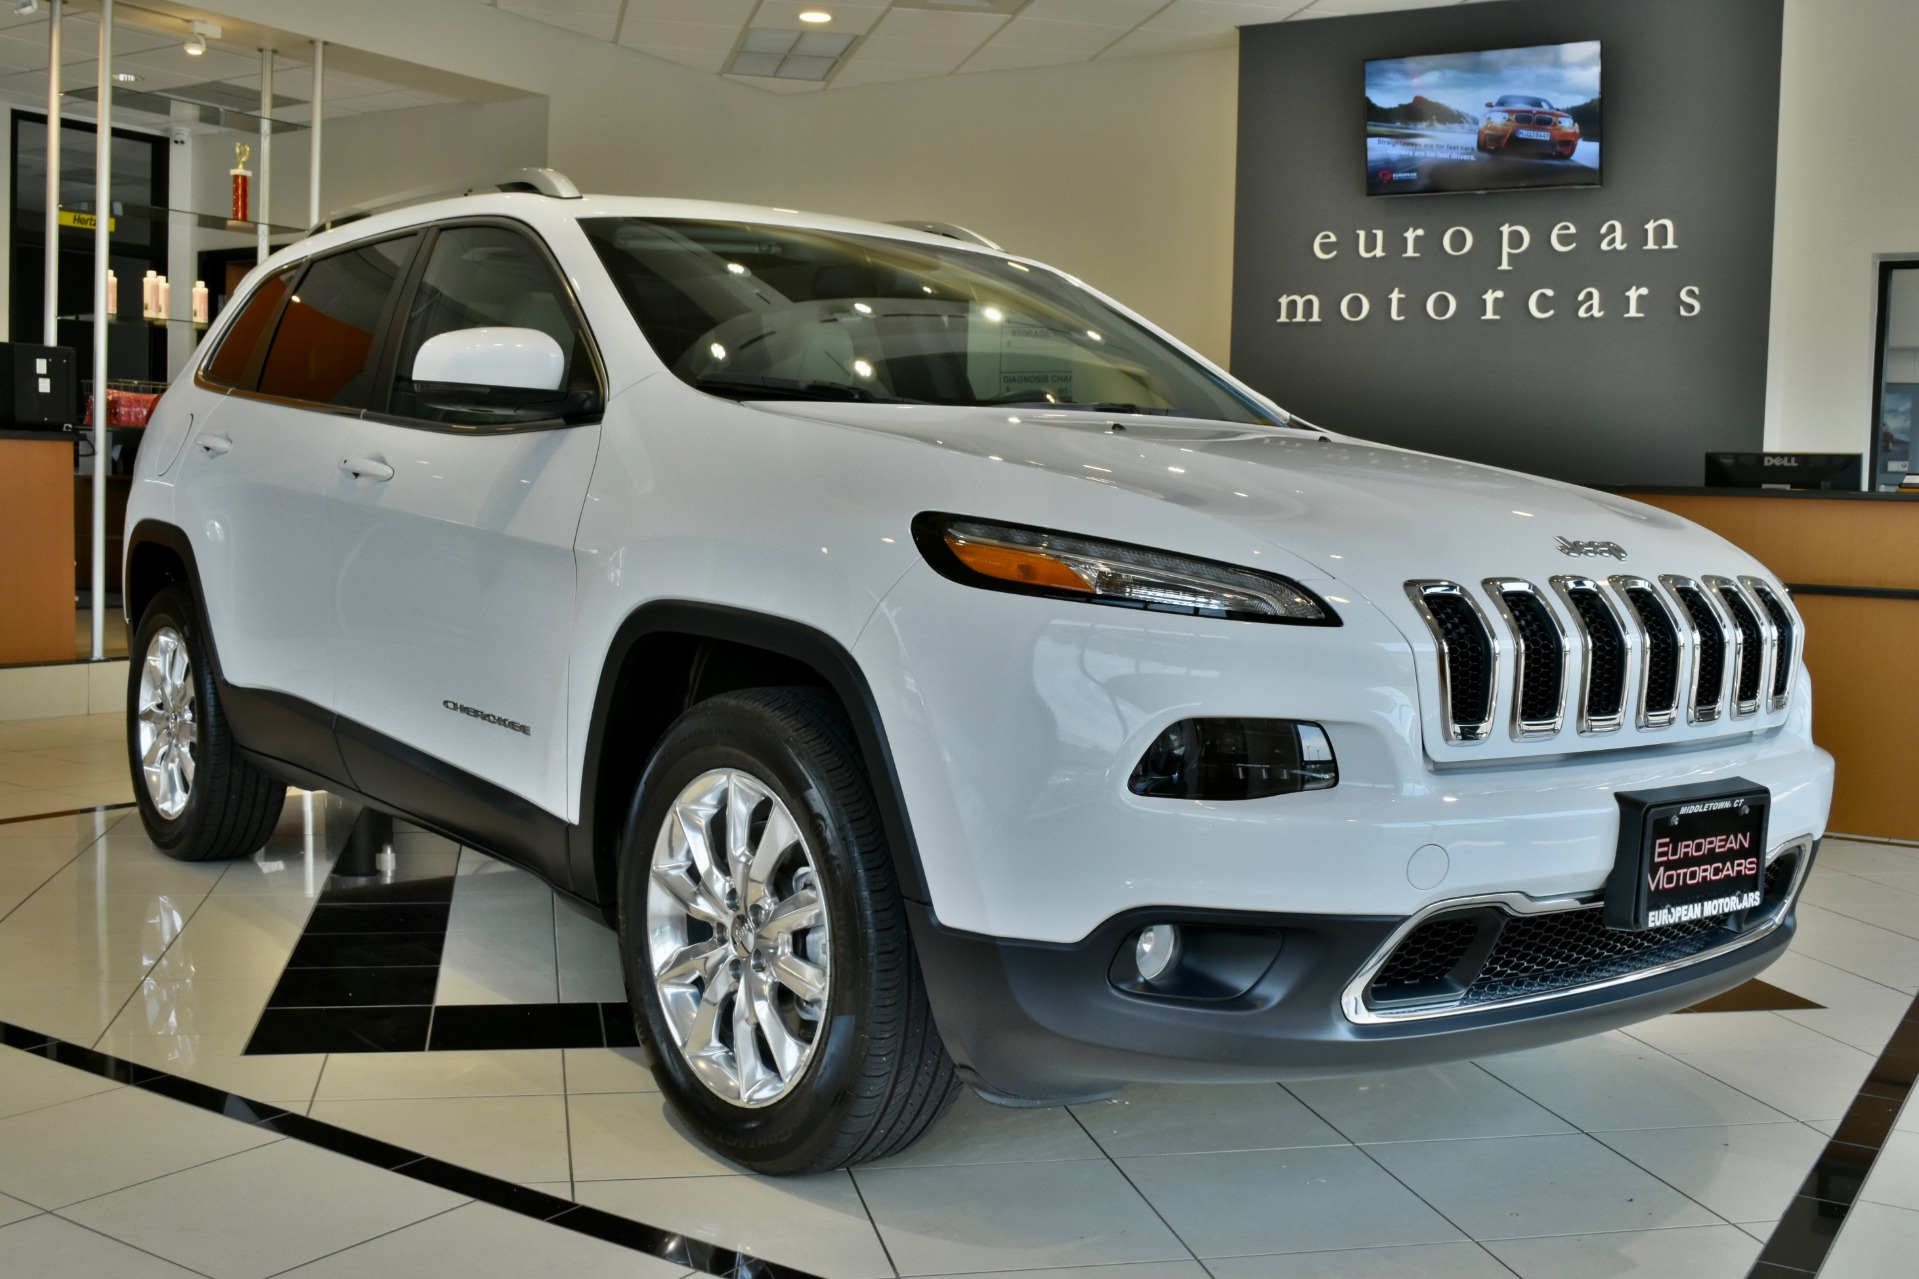 Used 2015 Jeep Cherokee Limited For Sale Sold European Motorcars Stock 522619 